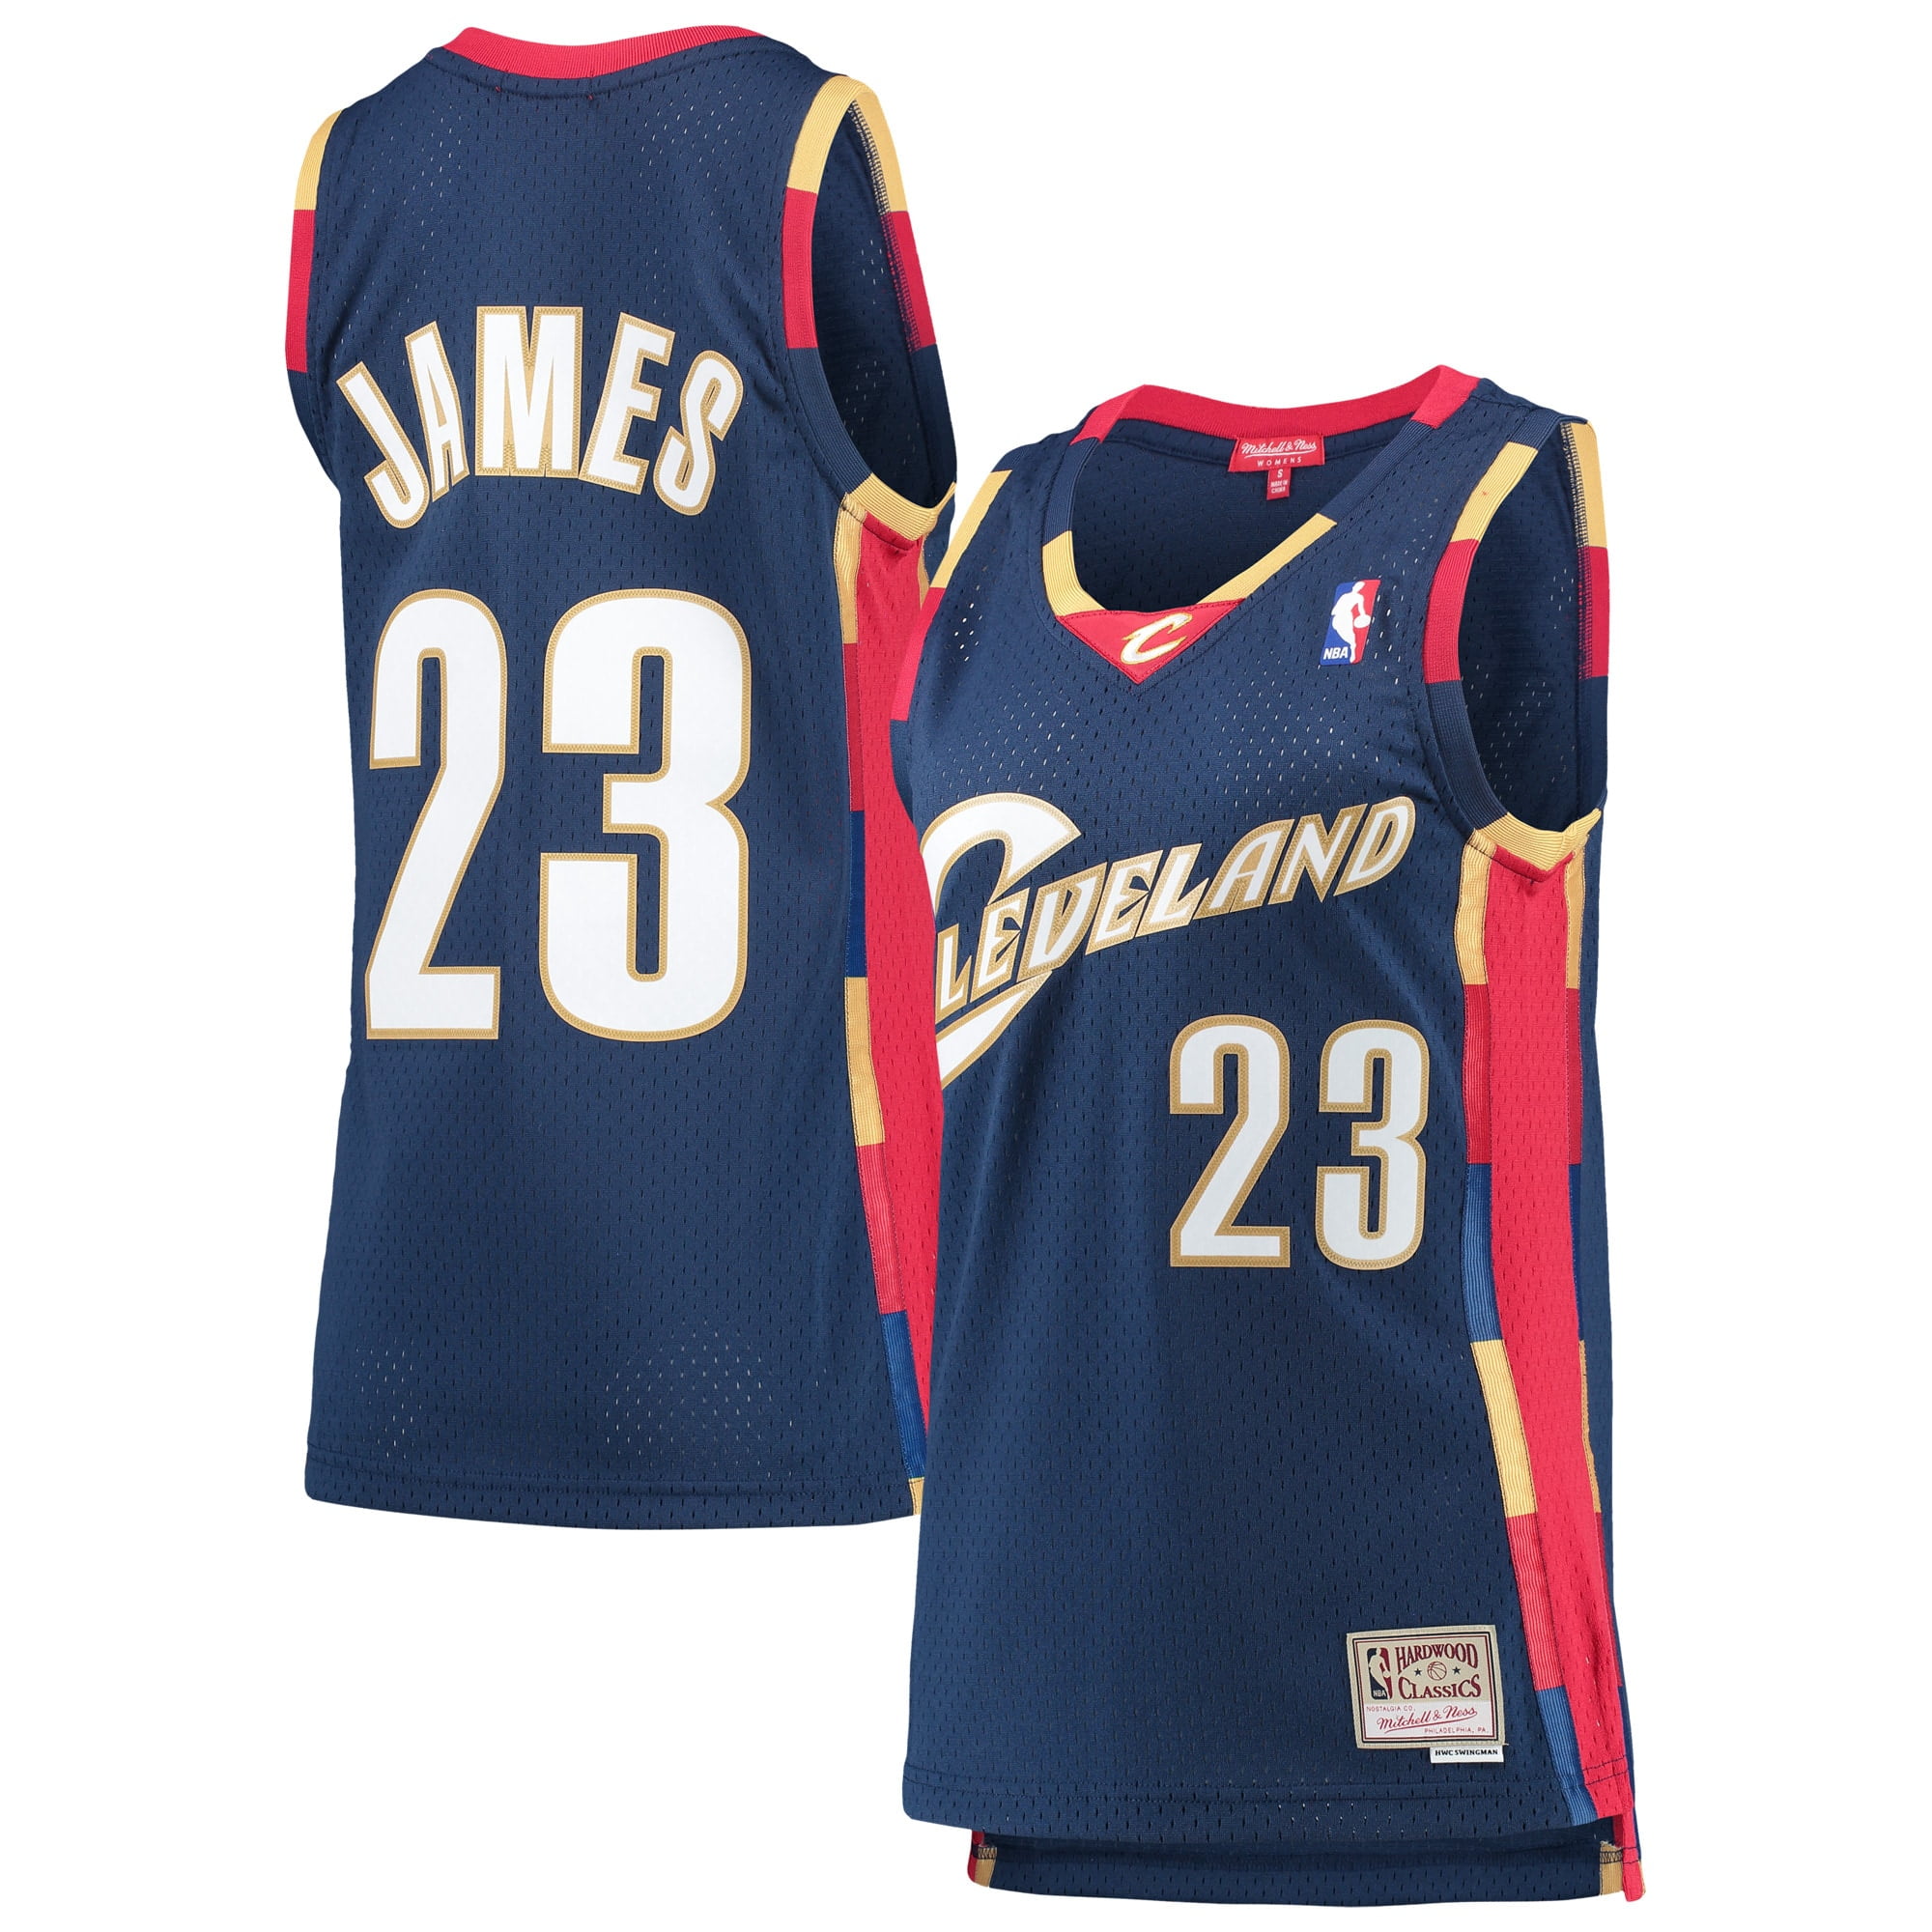 Cleveland Cavaliers Merchandise, Jerseys, Apparel, Clothing